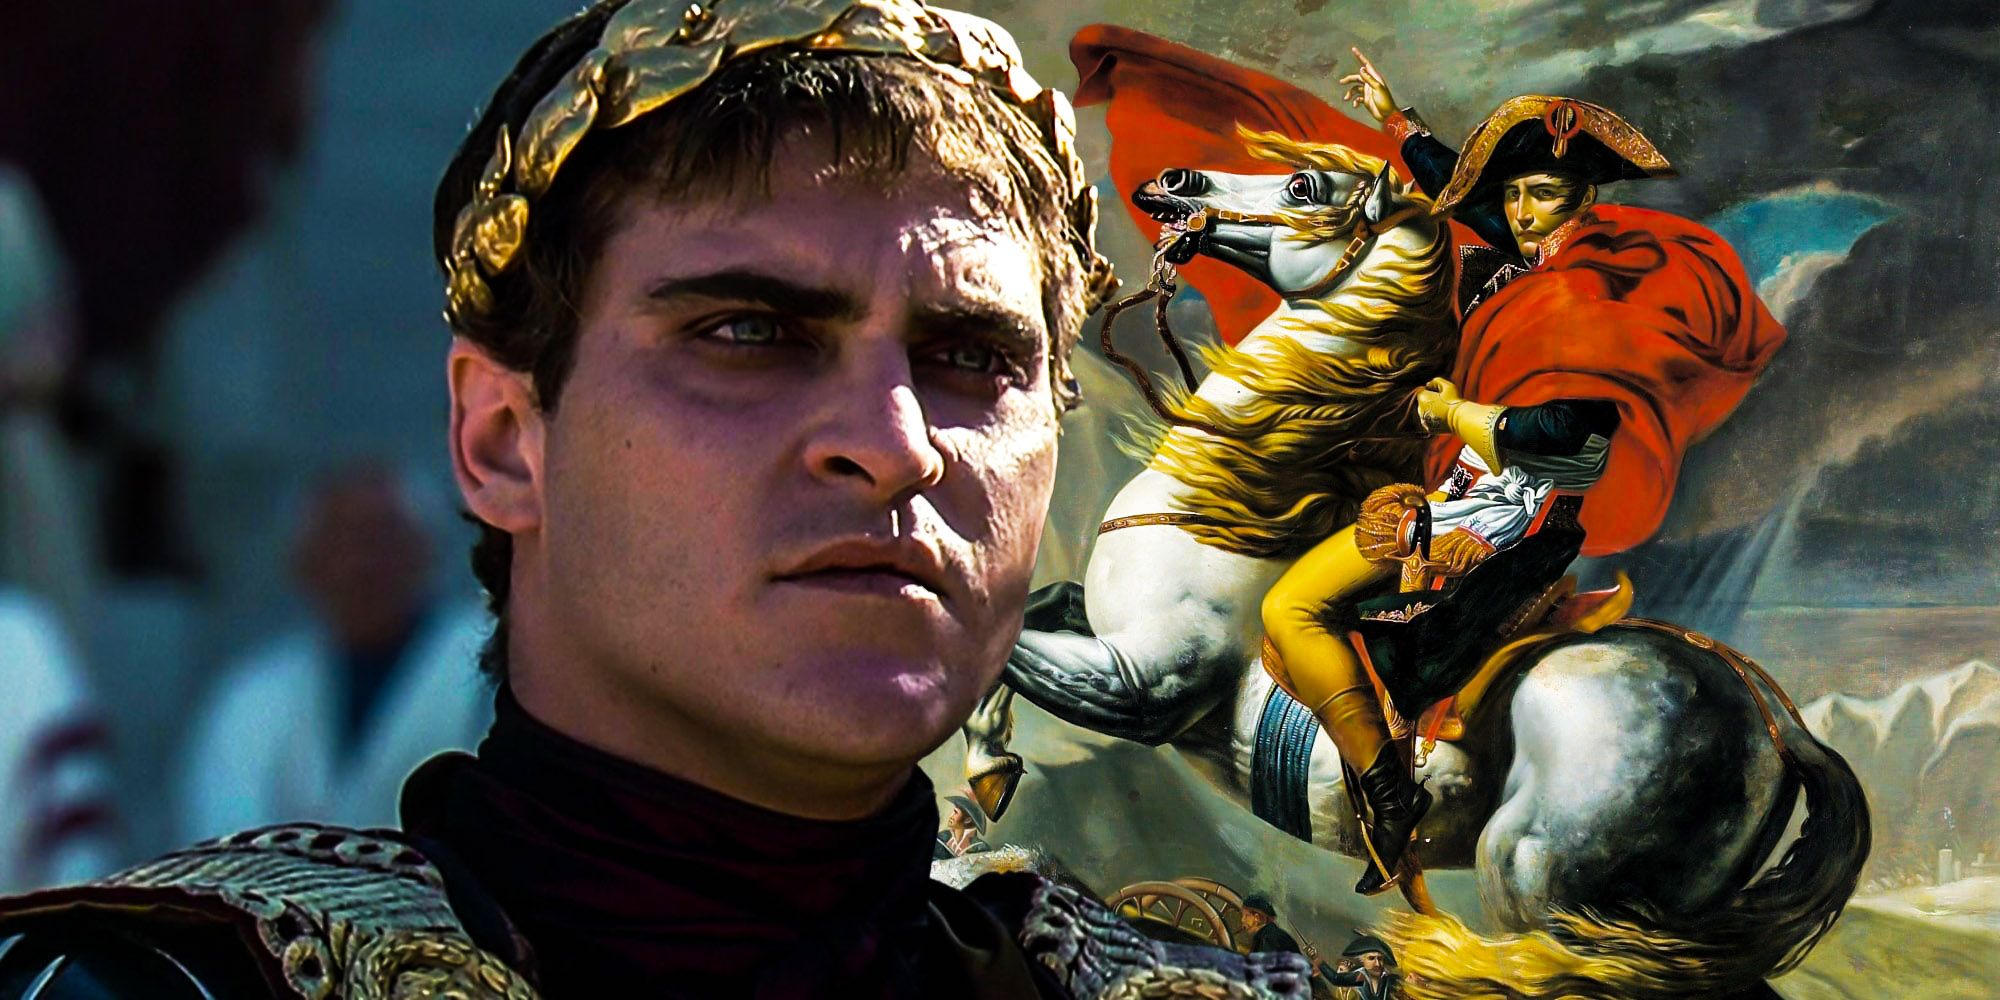 Blended image of Joaquin Phoenix and Napoleon Can Take His Gladiator Greatness Even Further